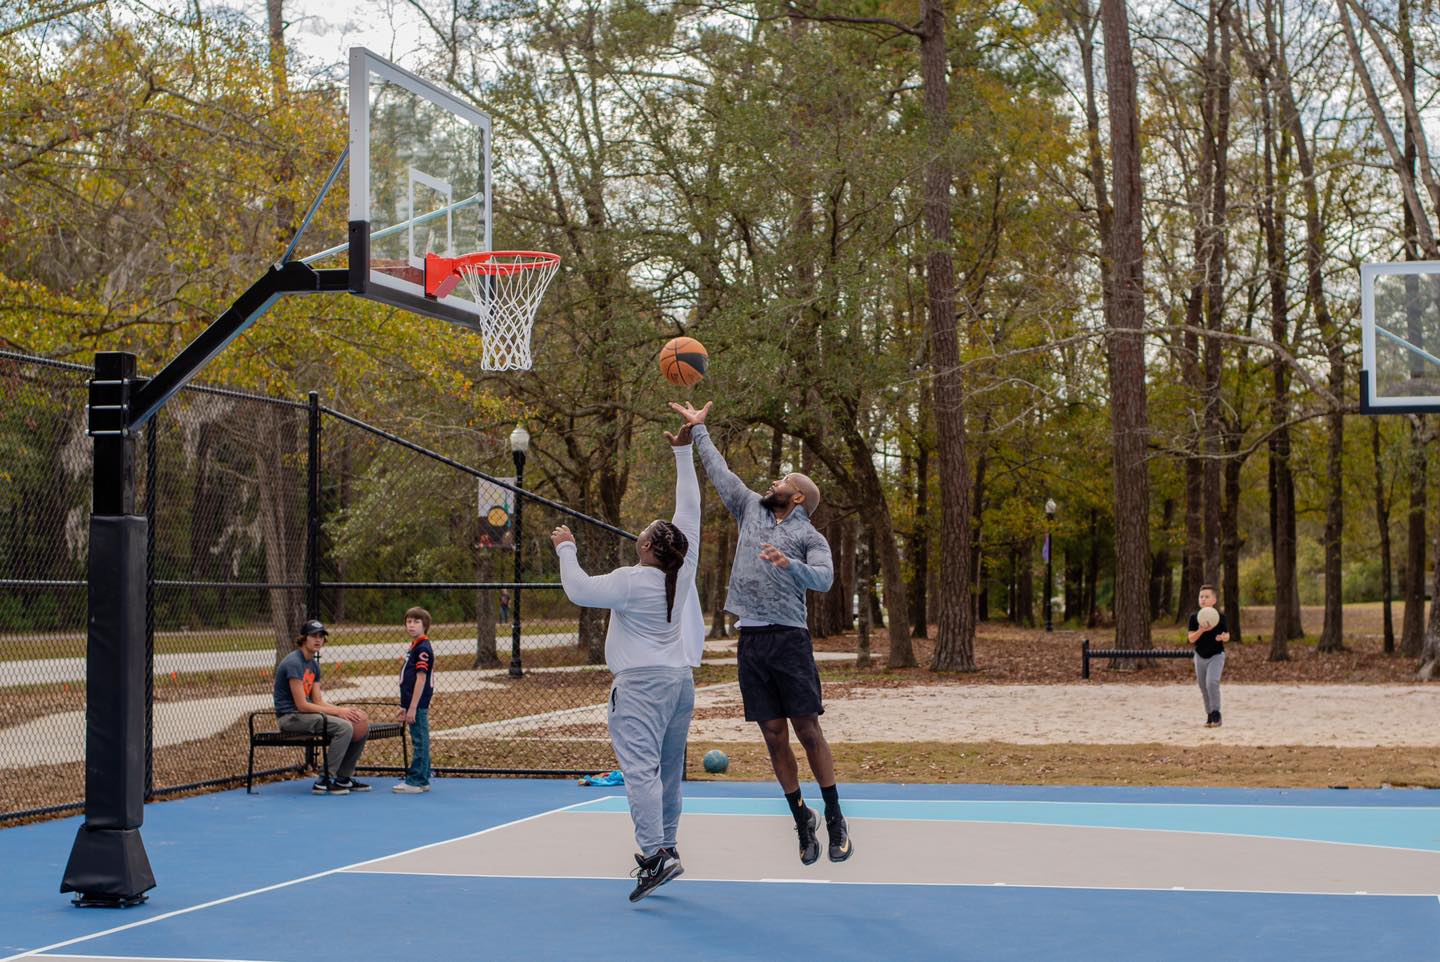 basketball game at Central Creek Park